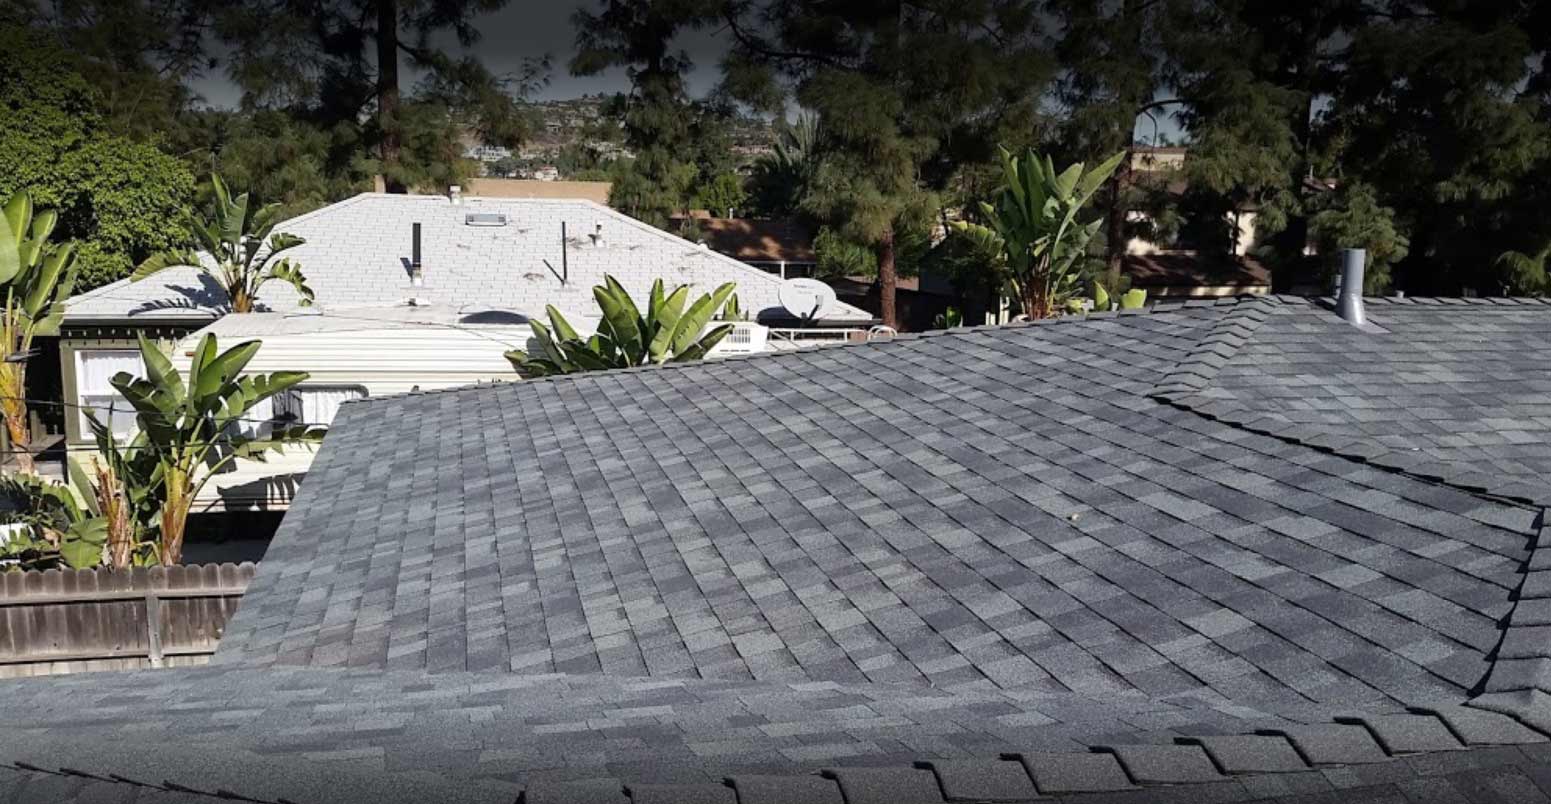 Roof Installation for Properties — View Of Newly Installed Roof in Lakeside, CA